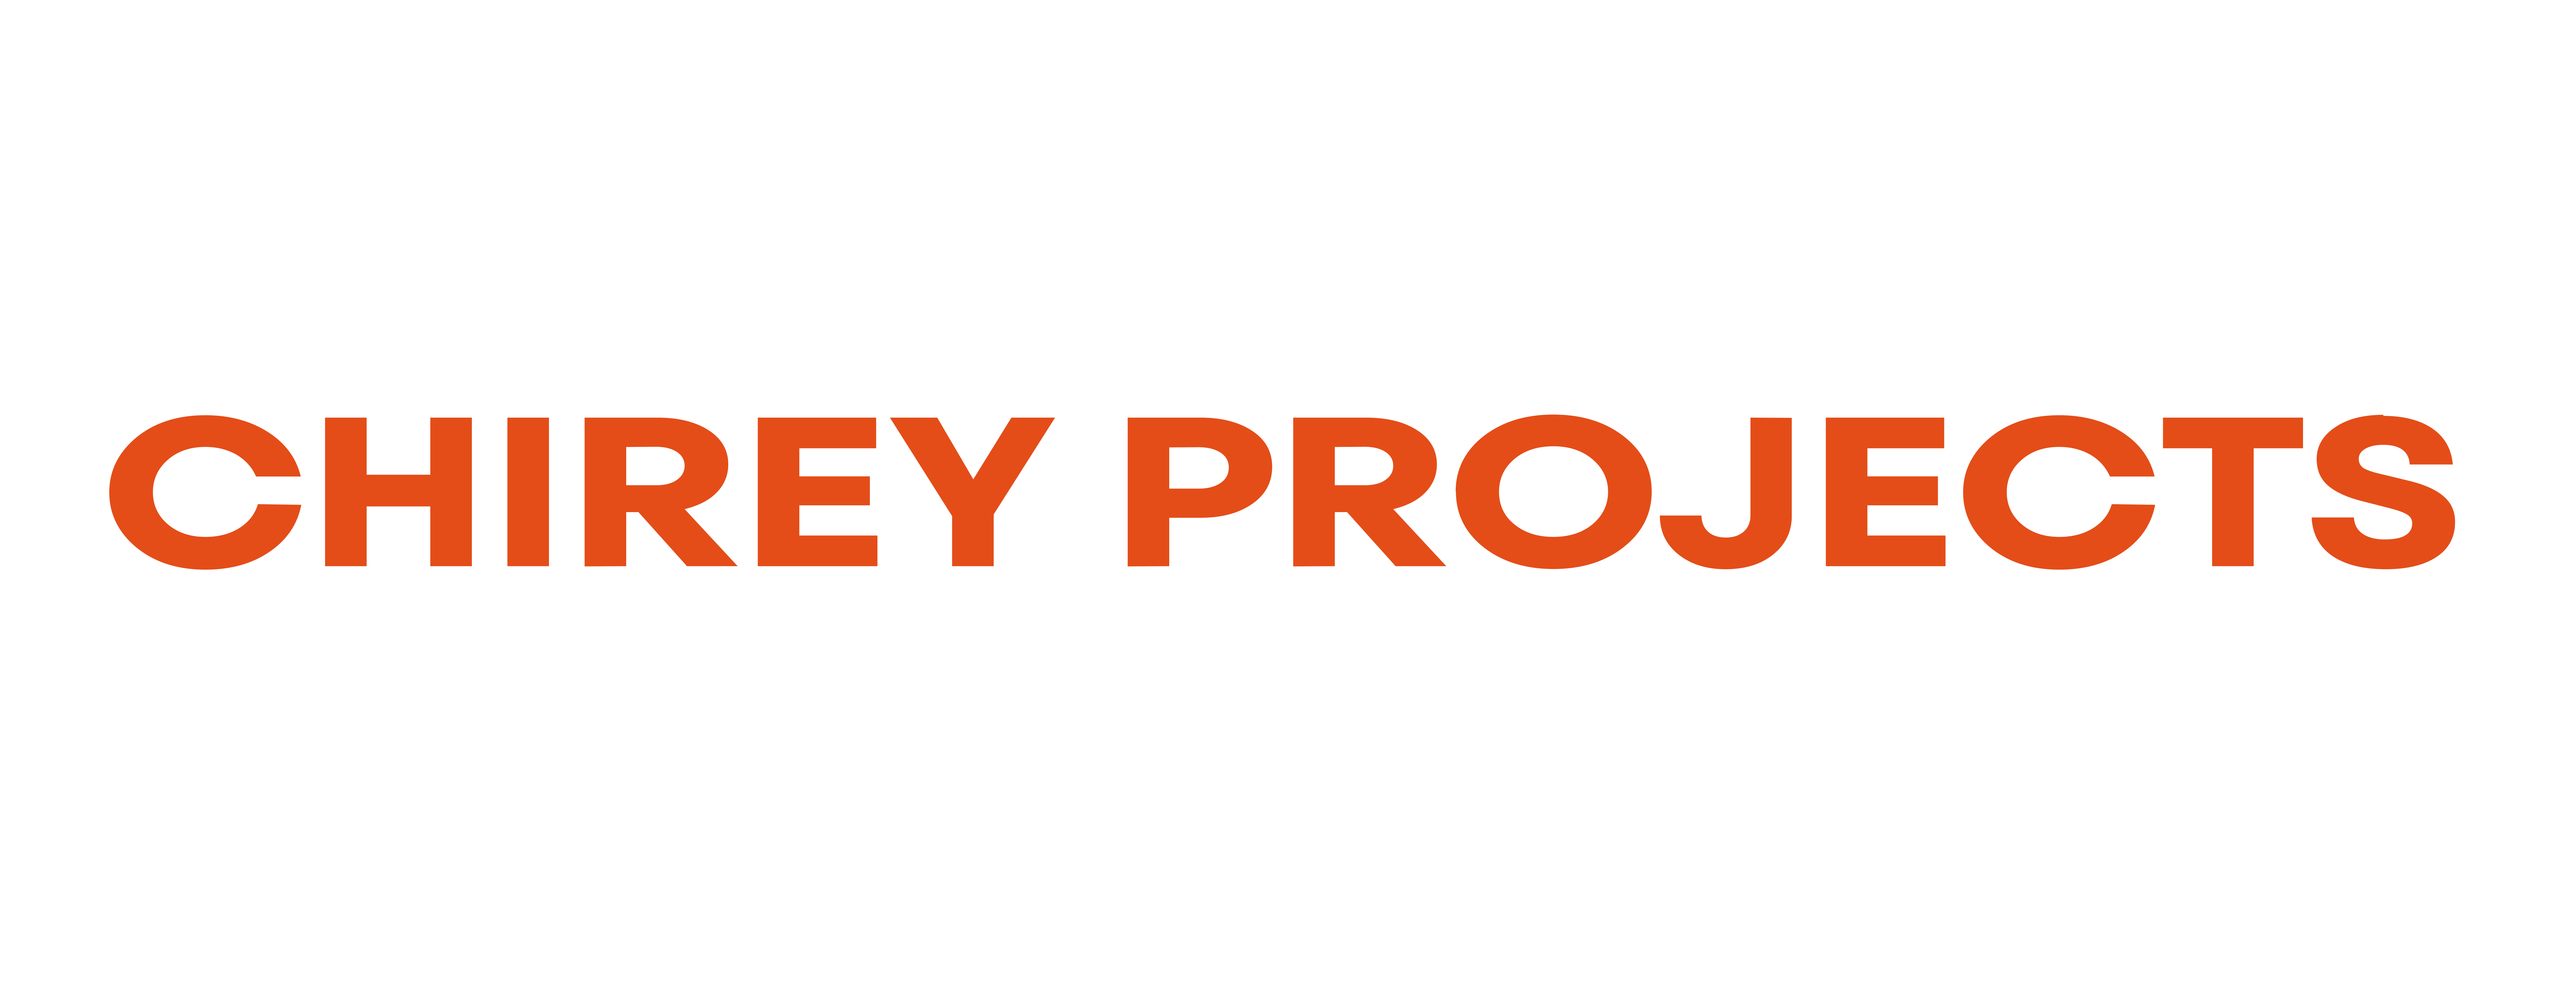 CHIREY PROJECTS